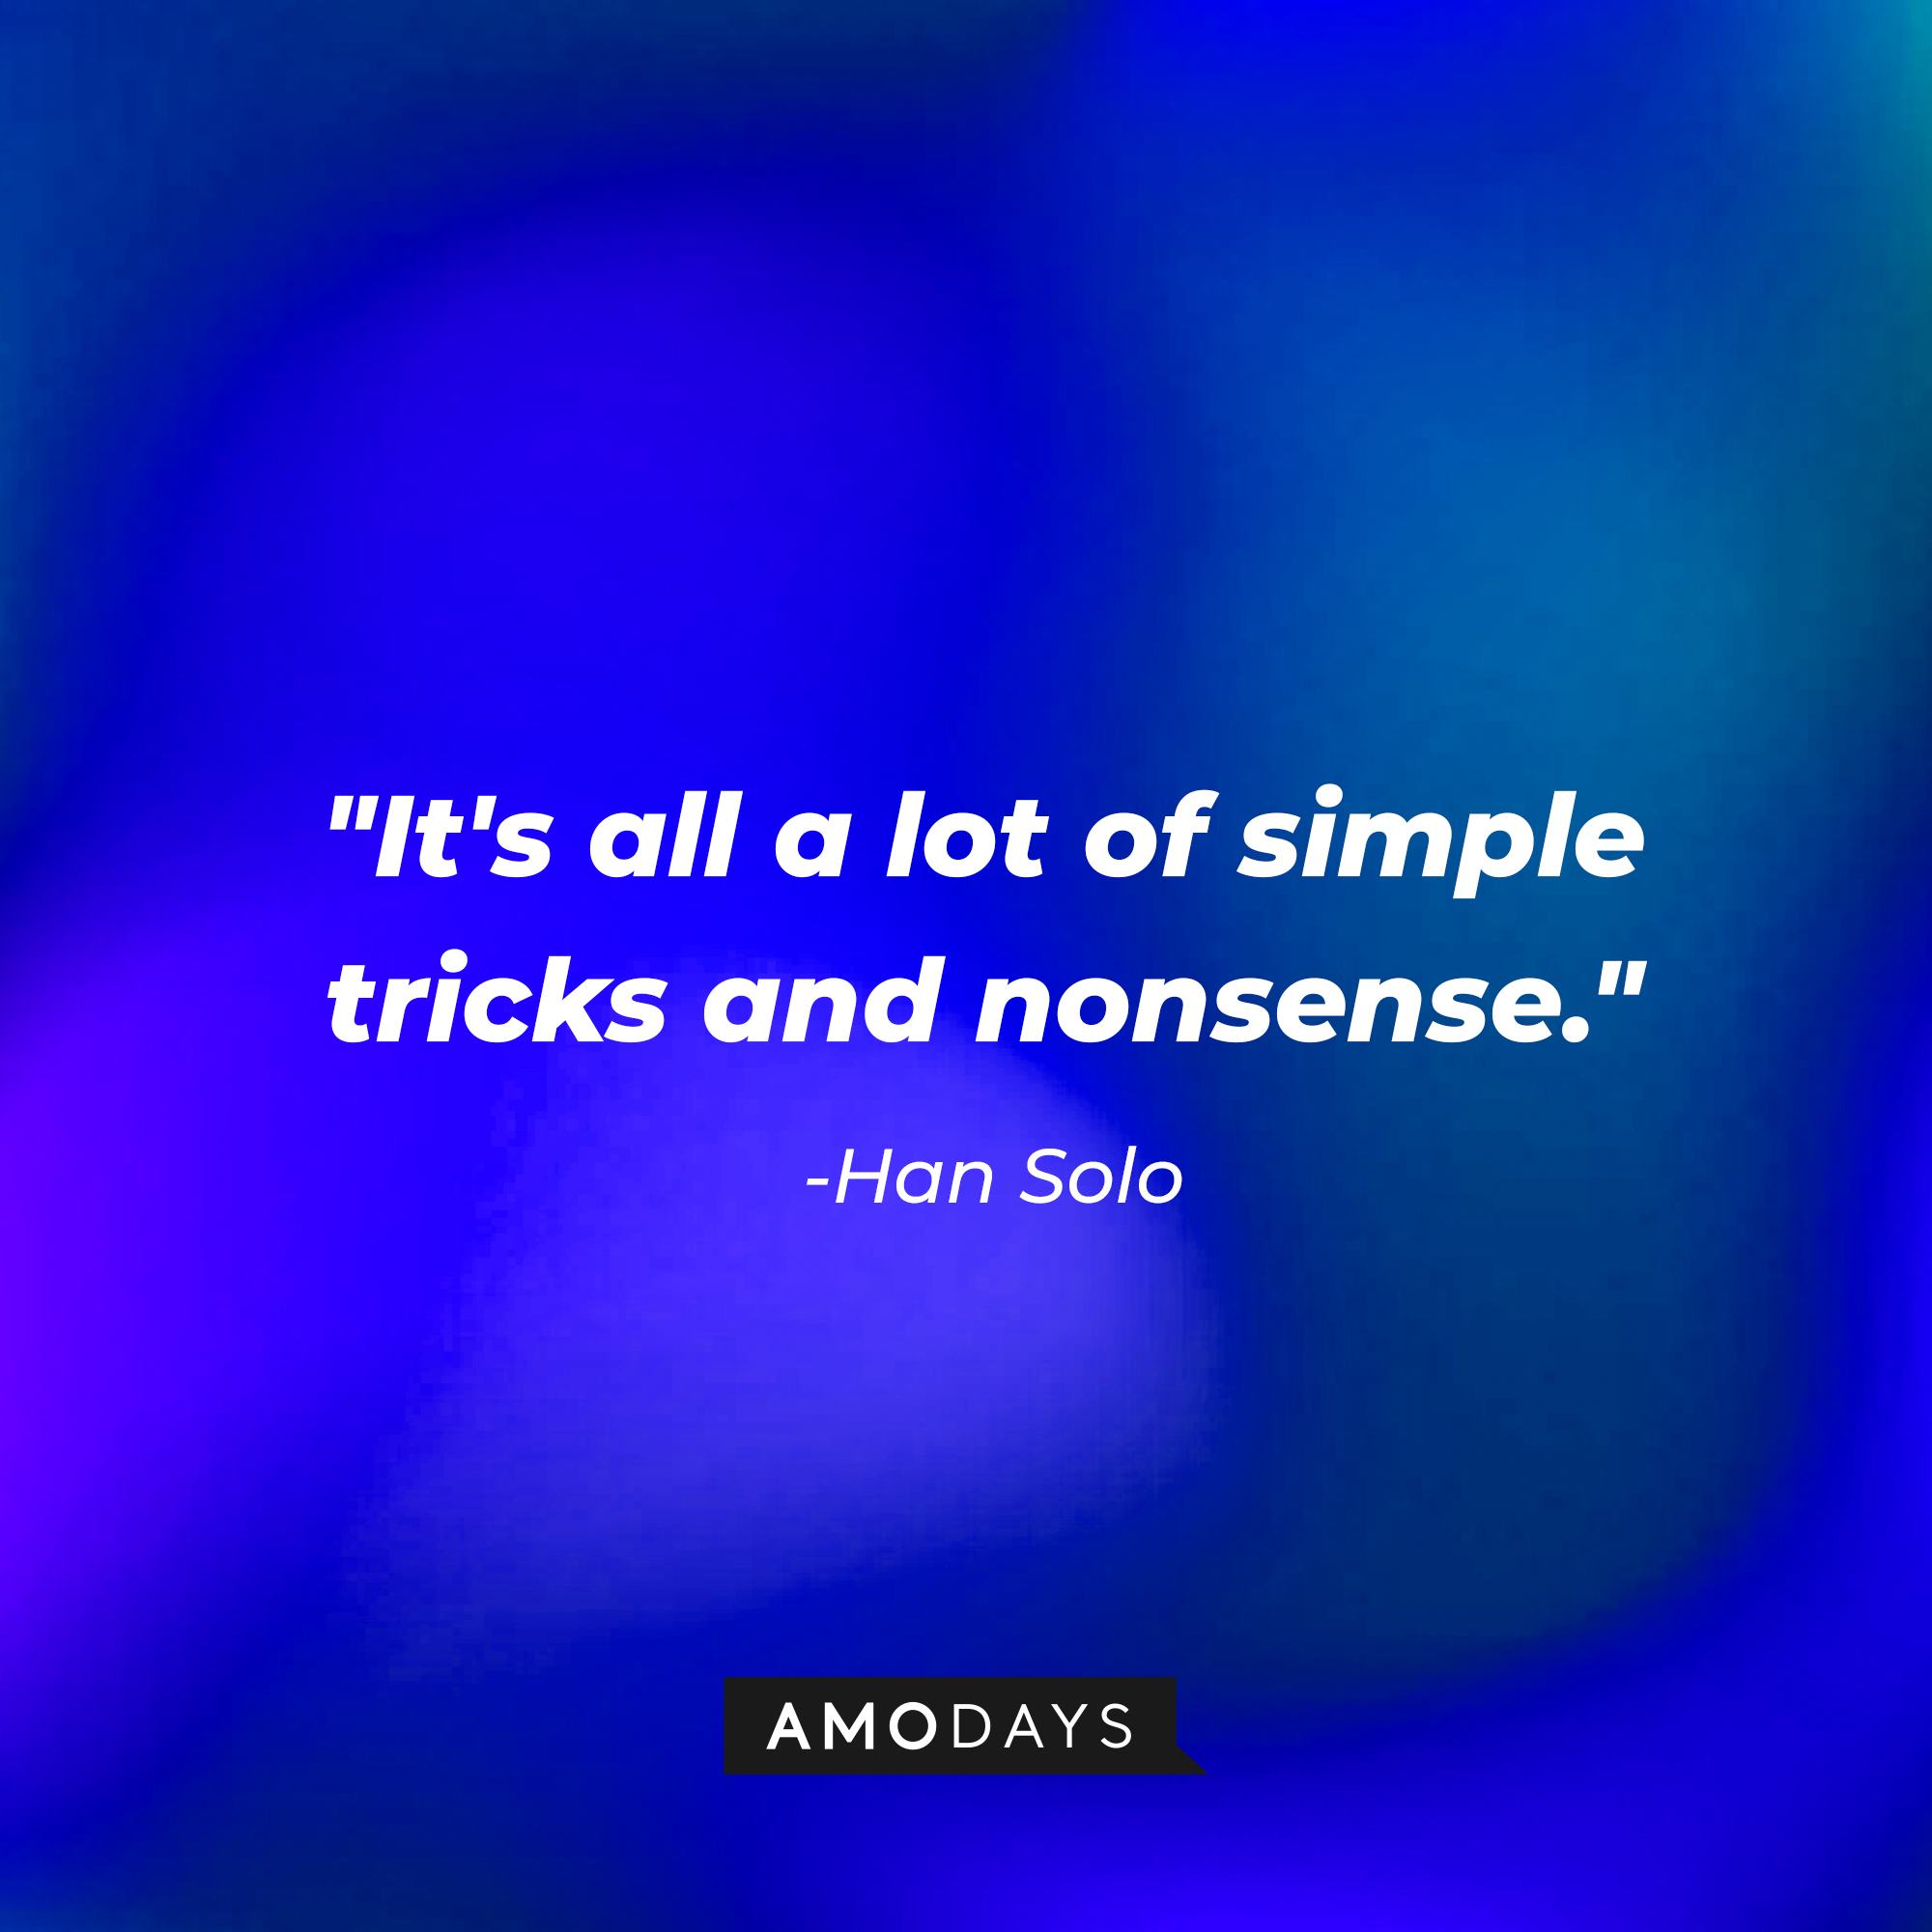 Han Solo’s quote: "It's all a lot of simple tricks and nonsense." | Source: AmoDays